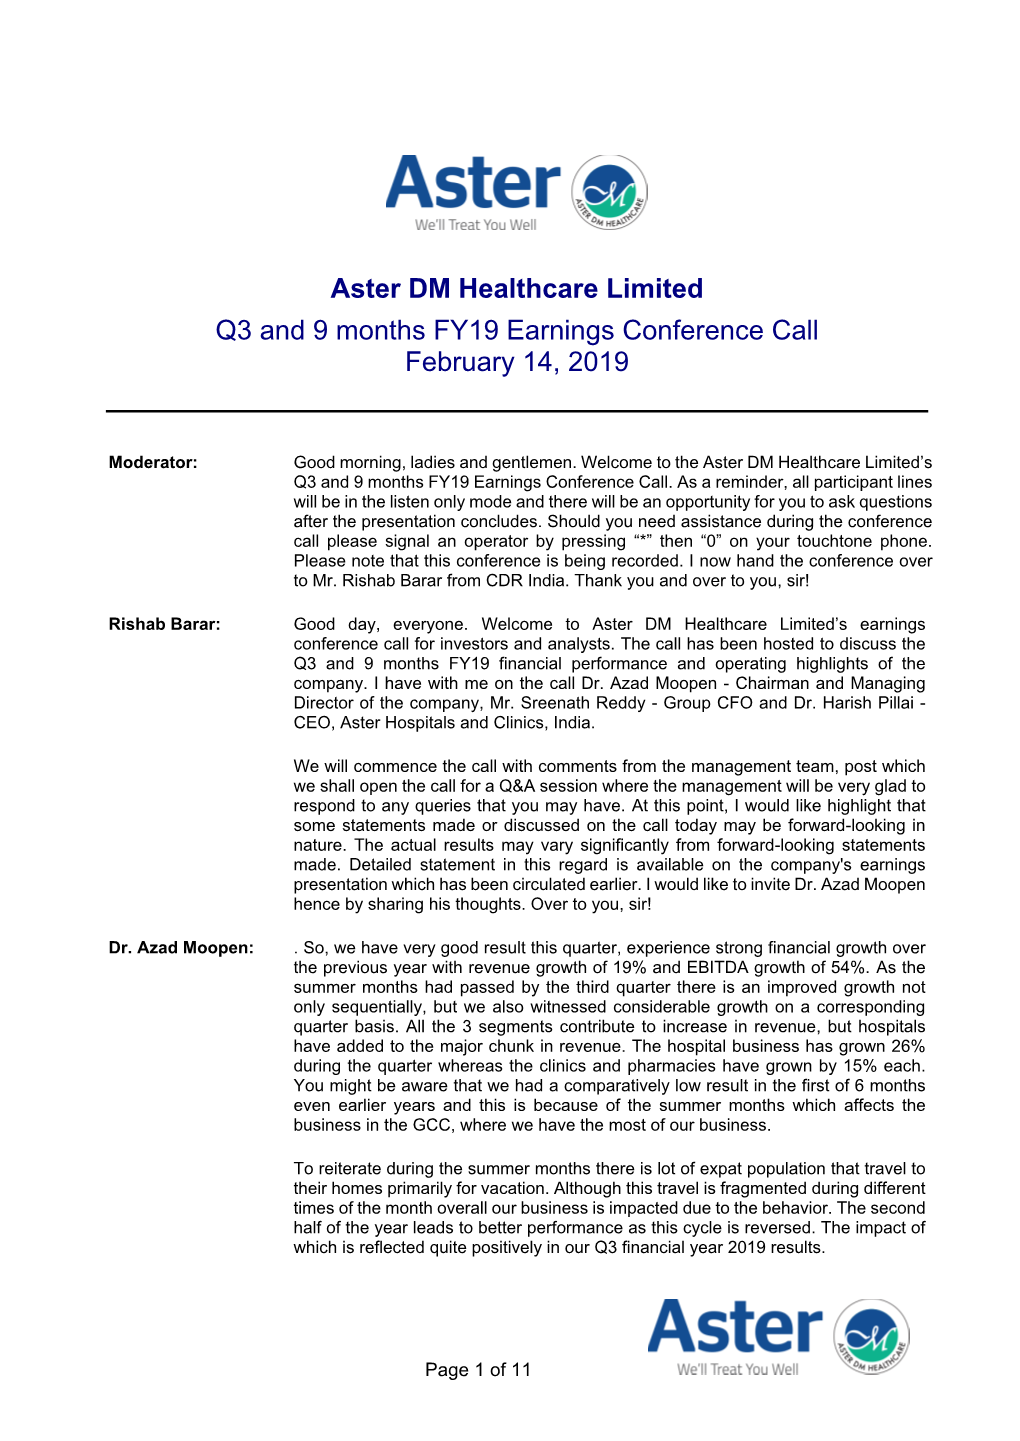 Aster DM Healthcare Limited Q3 and 9 Months FY19 Earnings Conference Call February 14, 2019